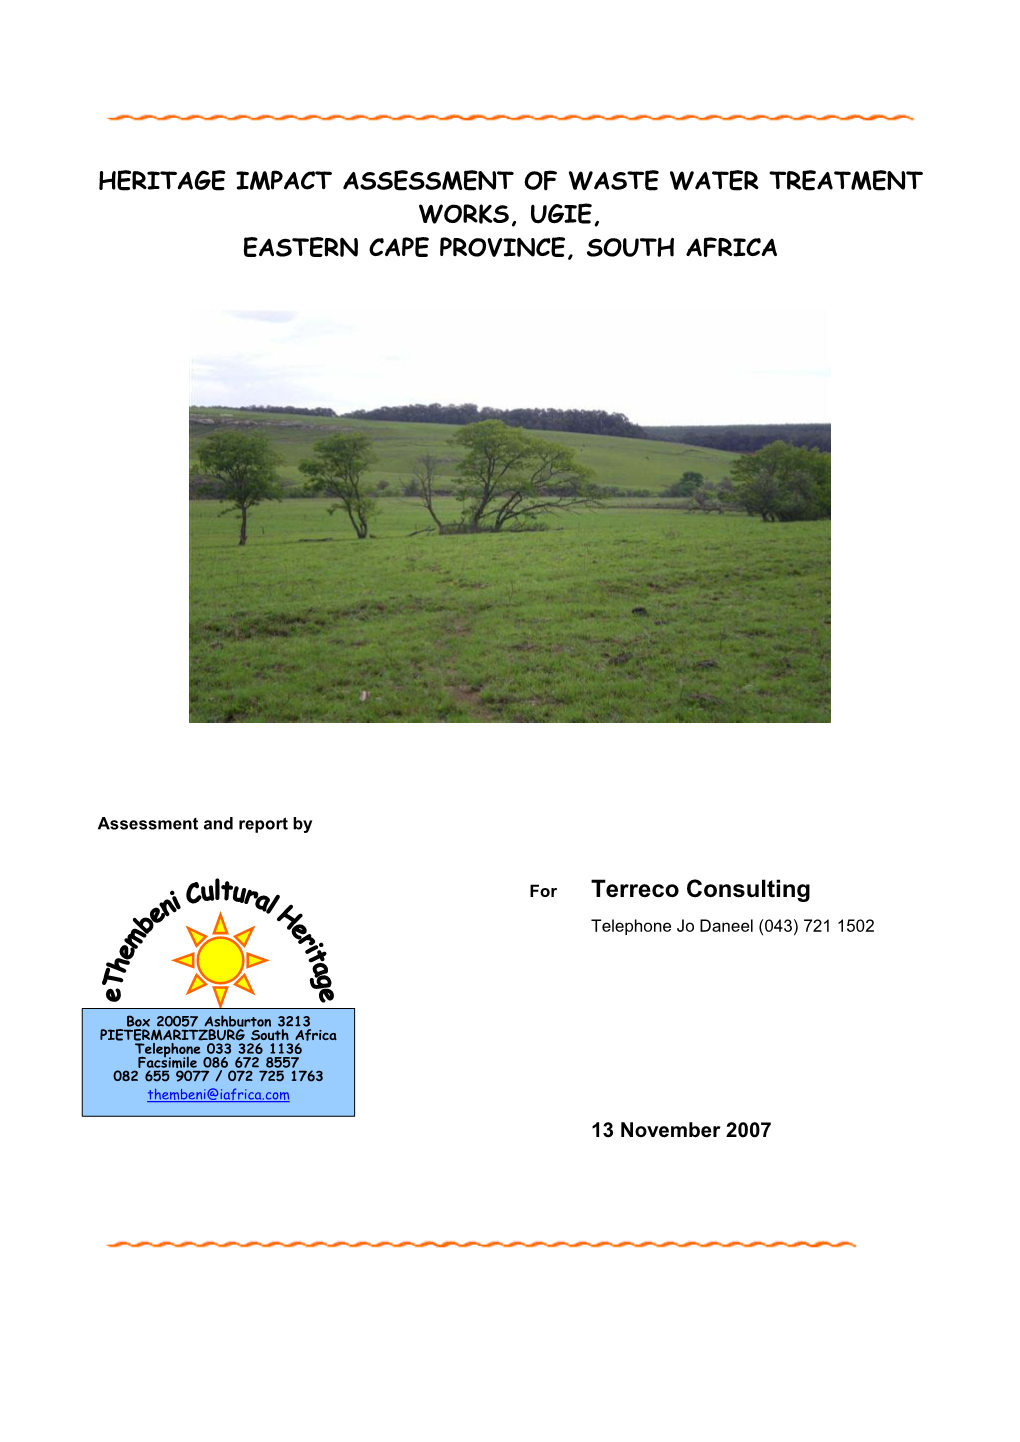 Heritage Impact Assessment of Waste Water Treatment Works, Ugie, Eastern Cape Province, South Africa